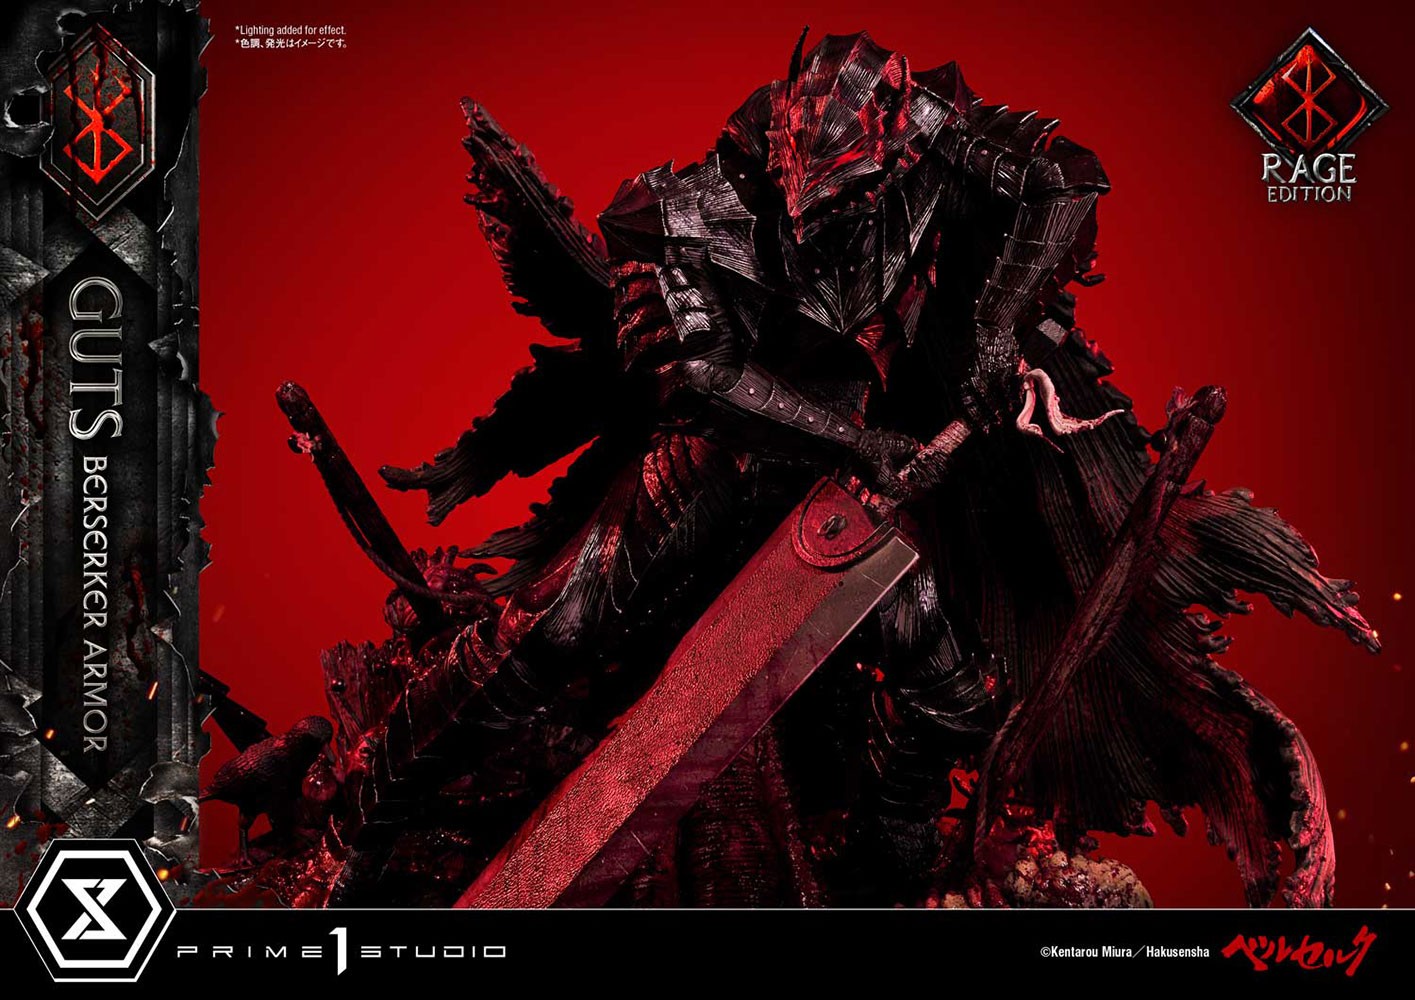 Guts Berserker Armor (Rage Edition) Collector Edition (Prototype Shown) View 41